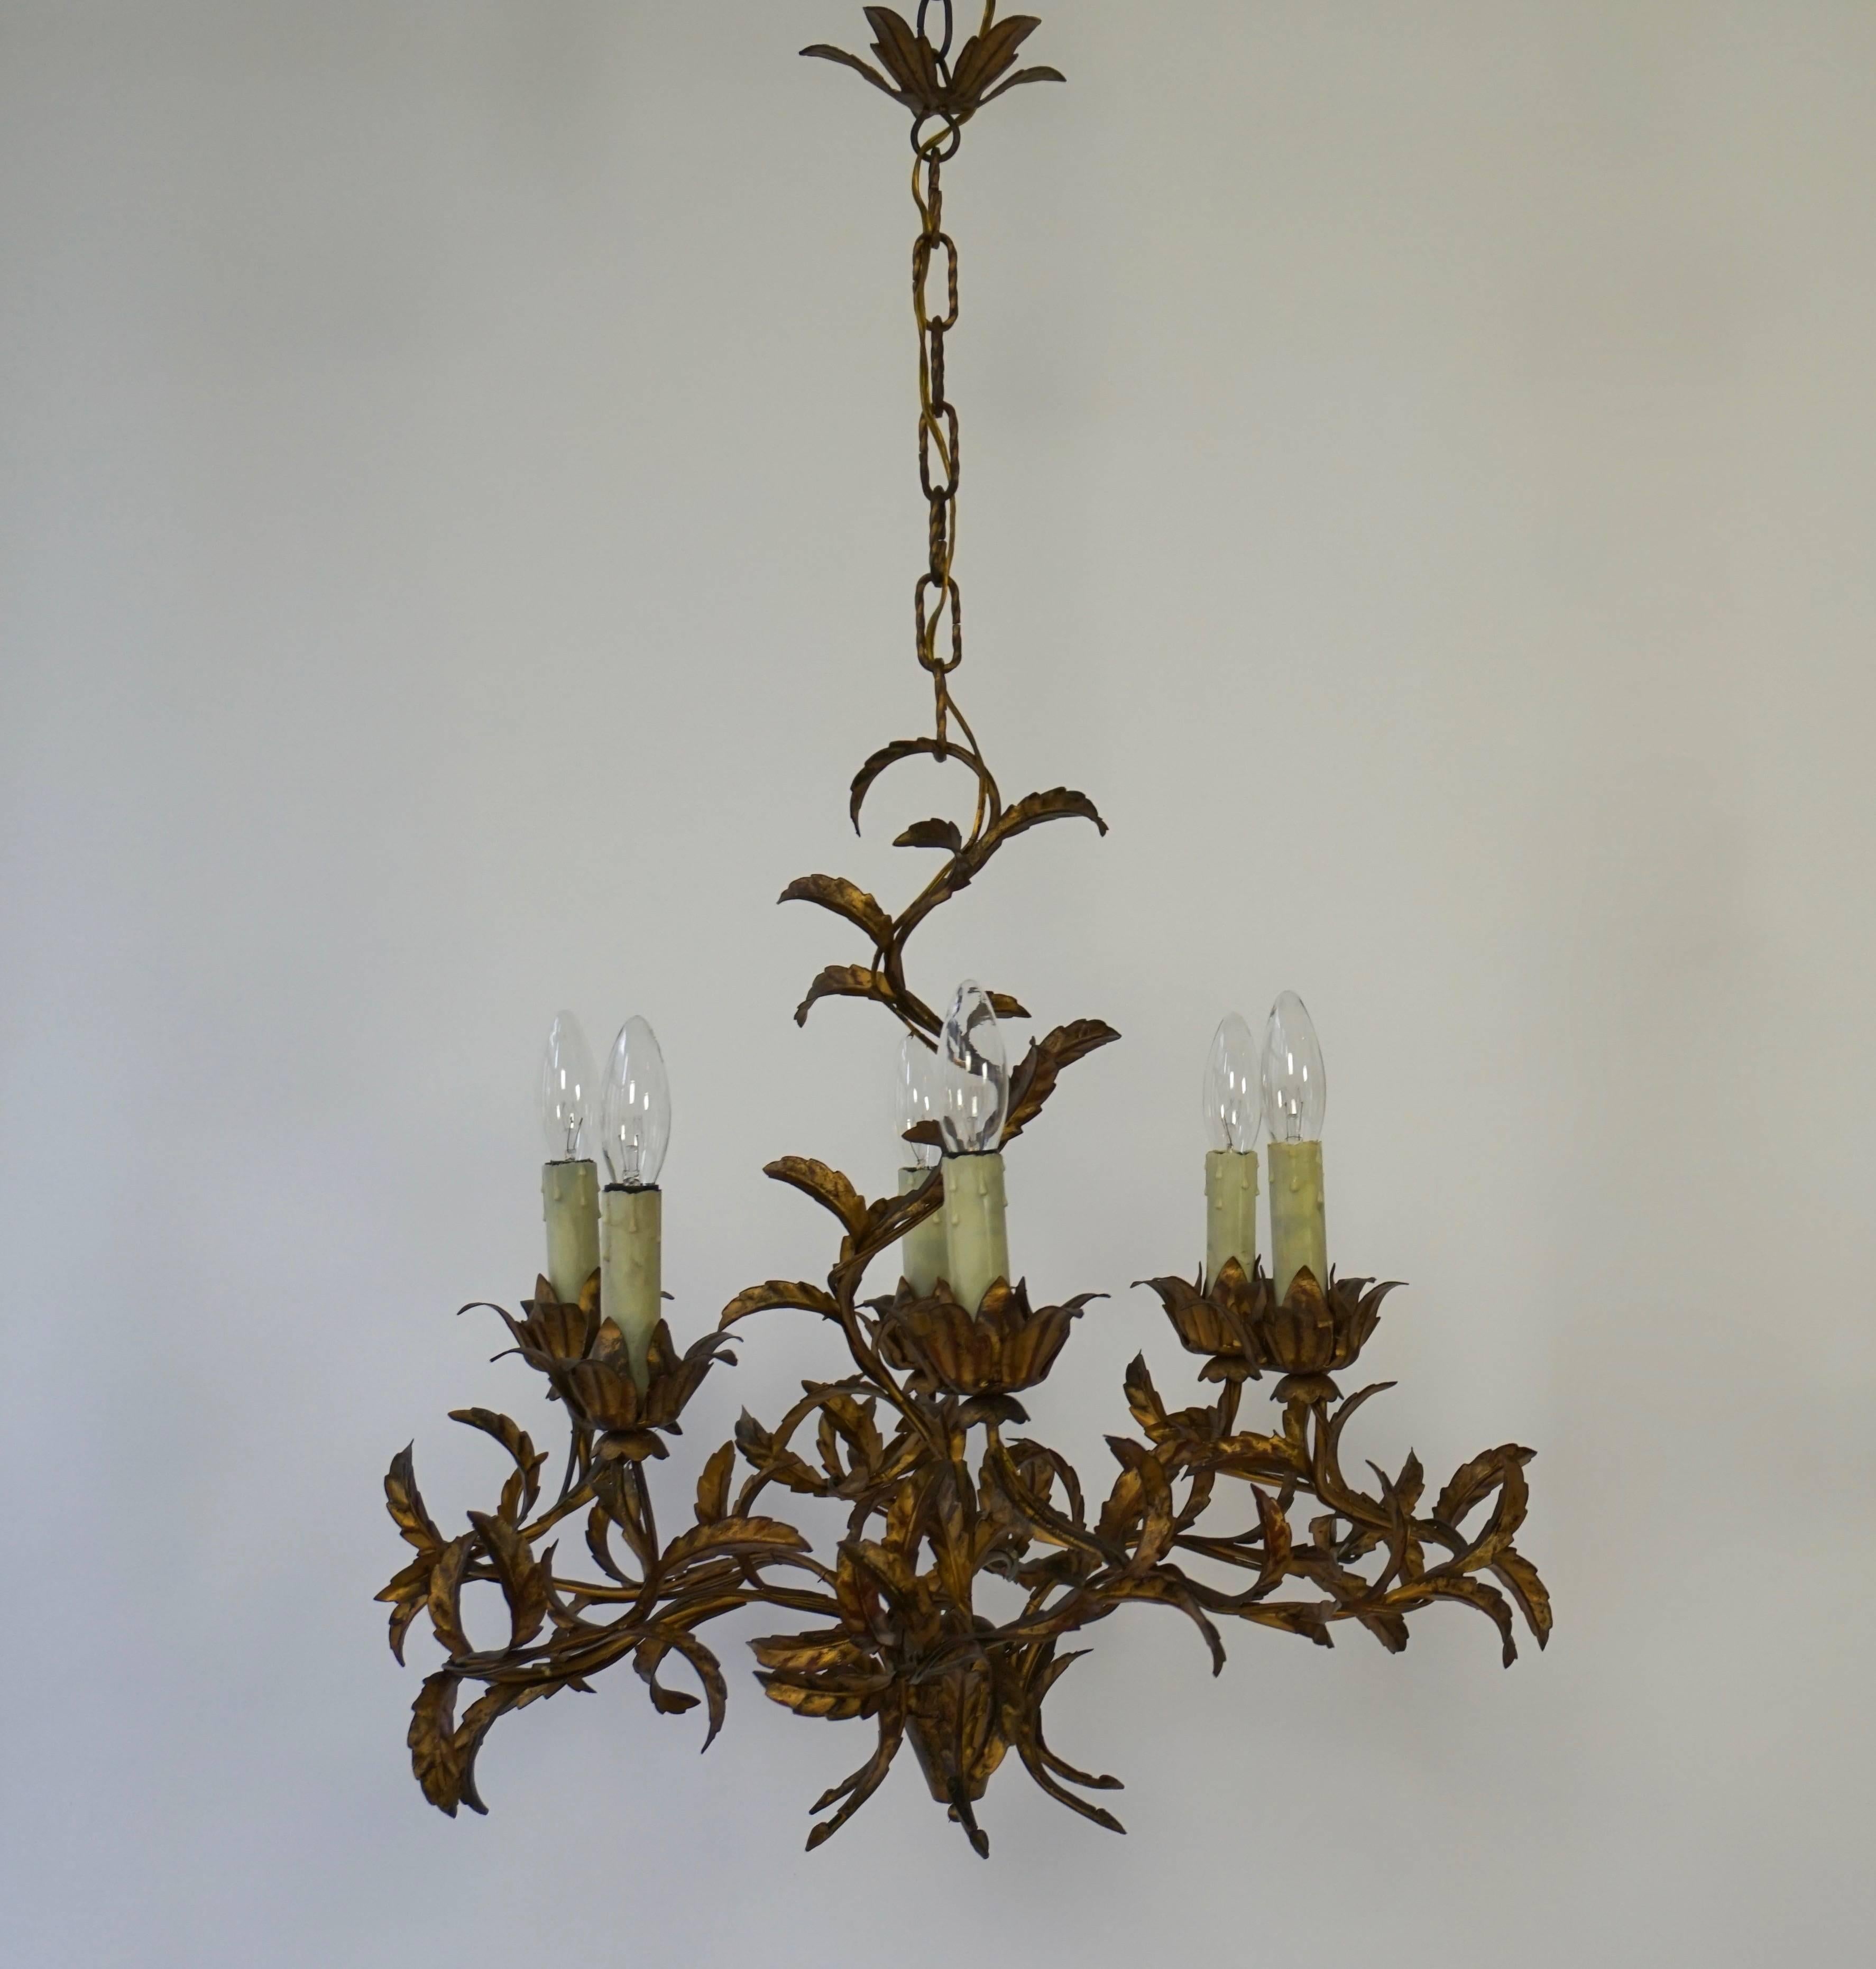 Elegant brass six arms chandelier with a beautiful patine.
Six E14 bulbs.
Measures: Diameter 58 cm,
height with the chain 90 cm,
height fixture 50 cm.